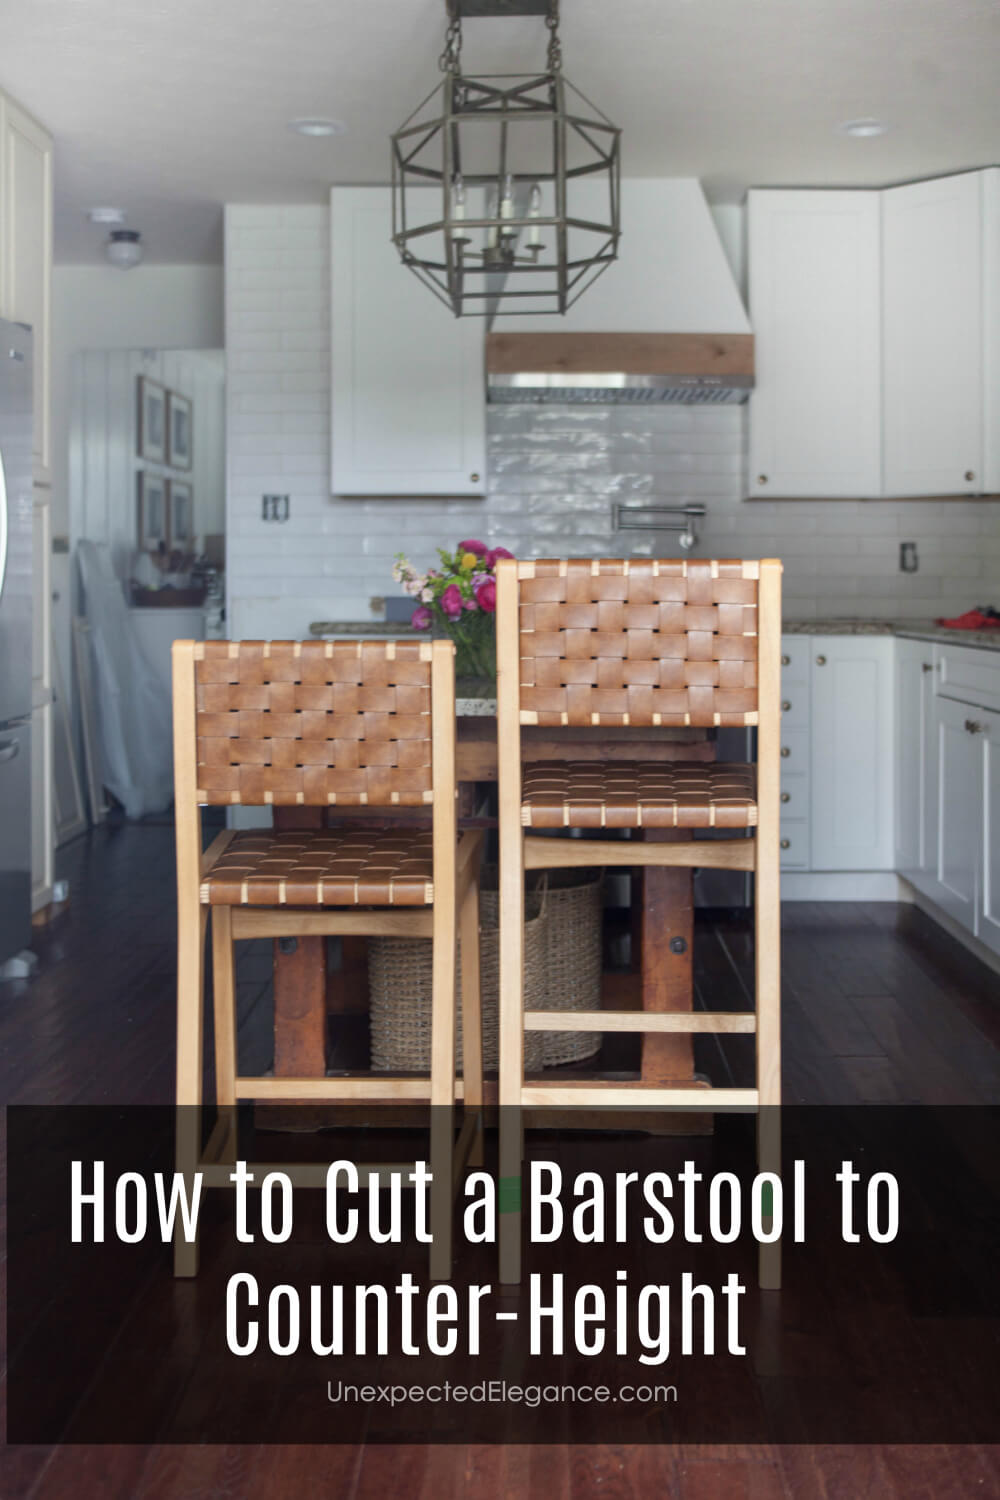 How To Cut A Barstool Counter Height, How To Cut Stool Legs